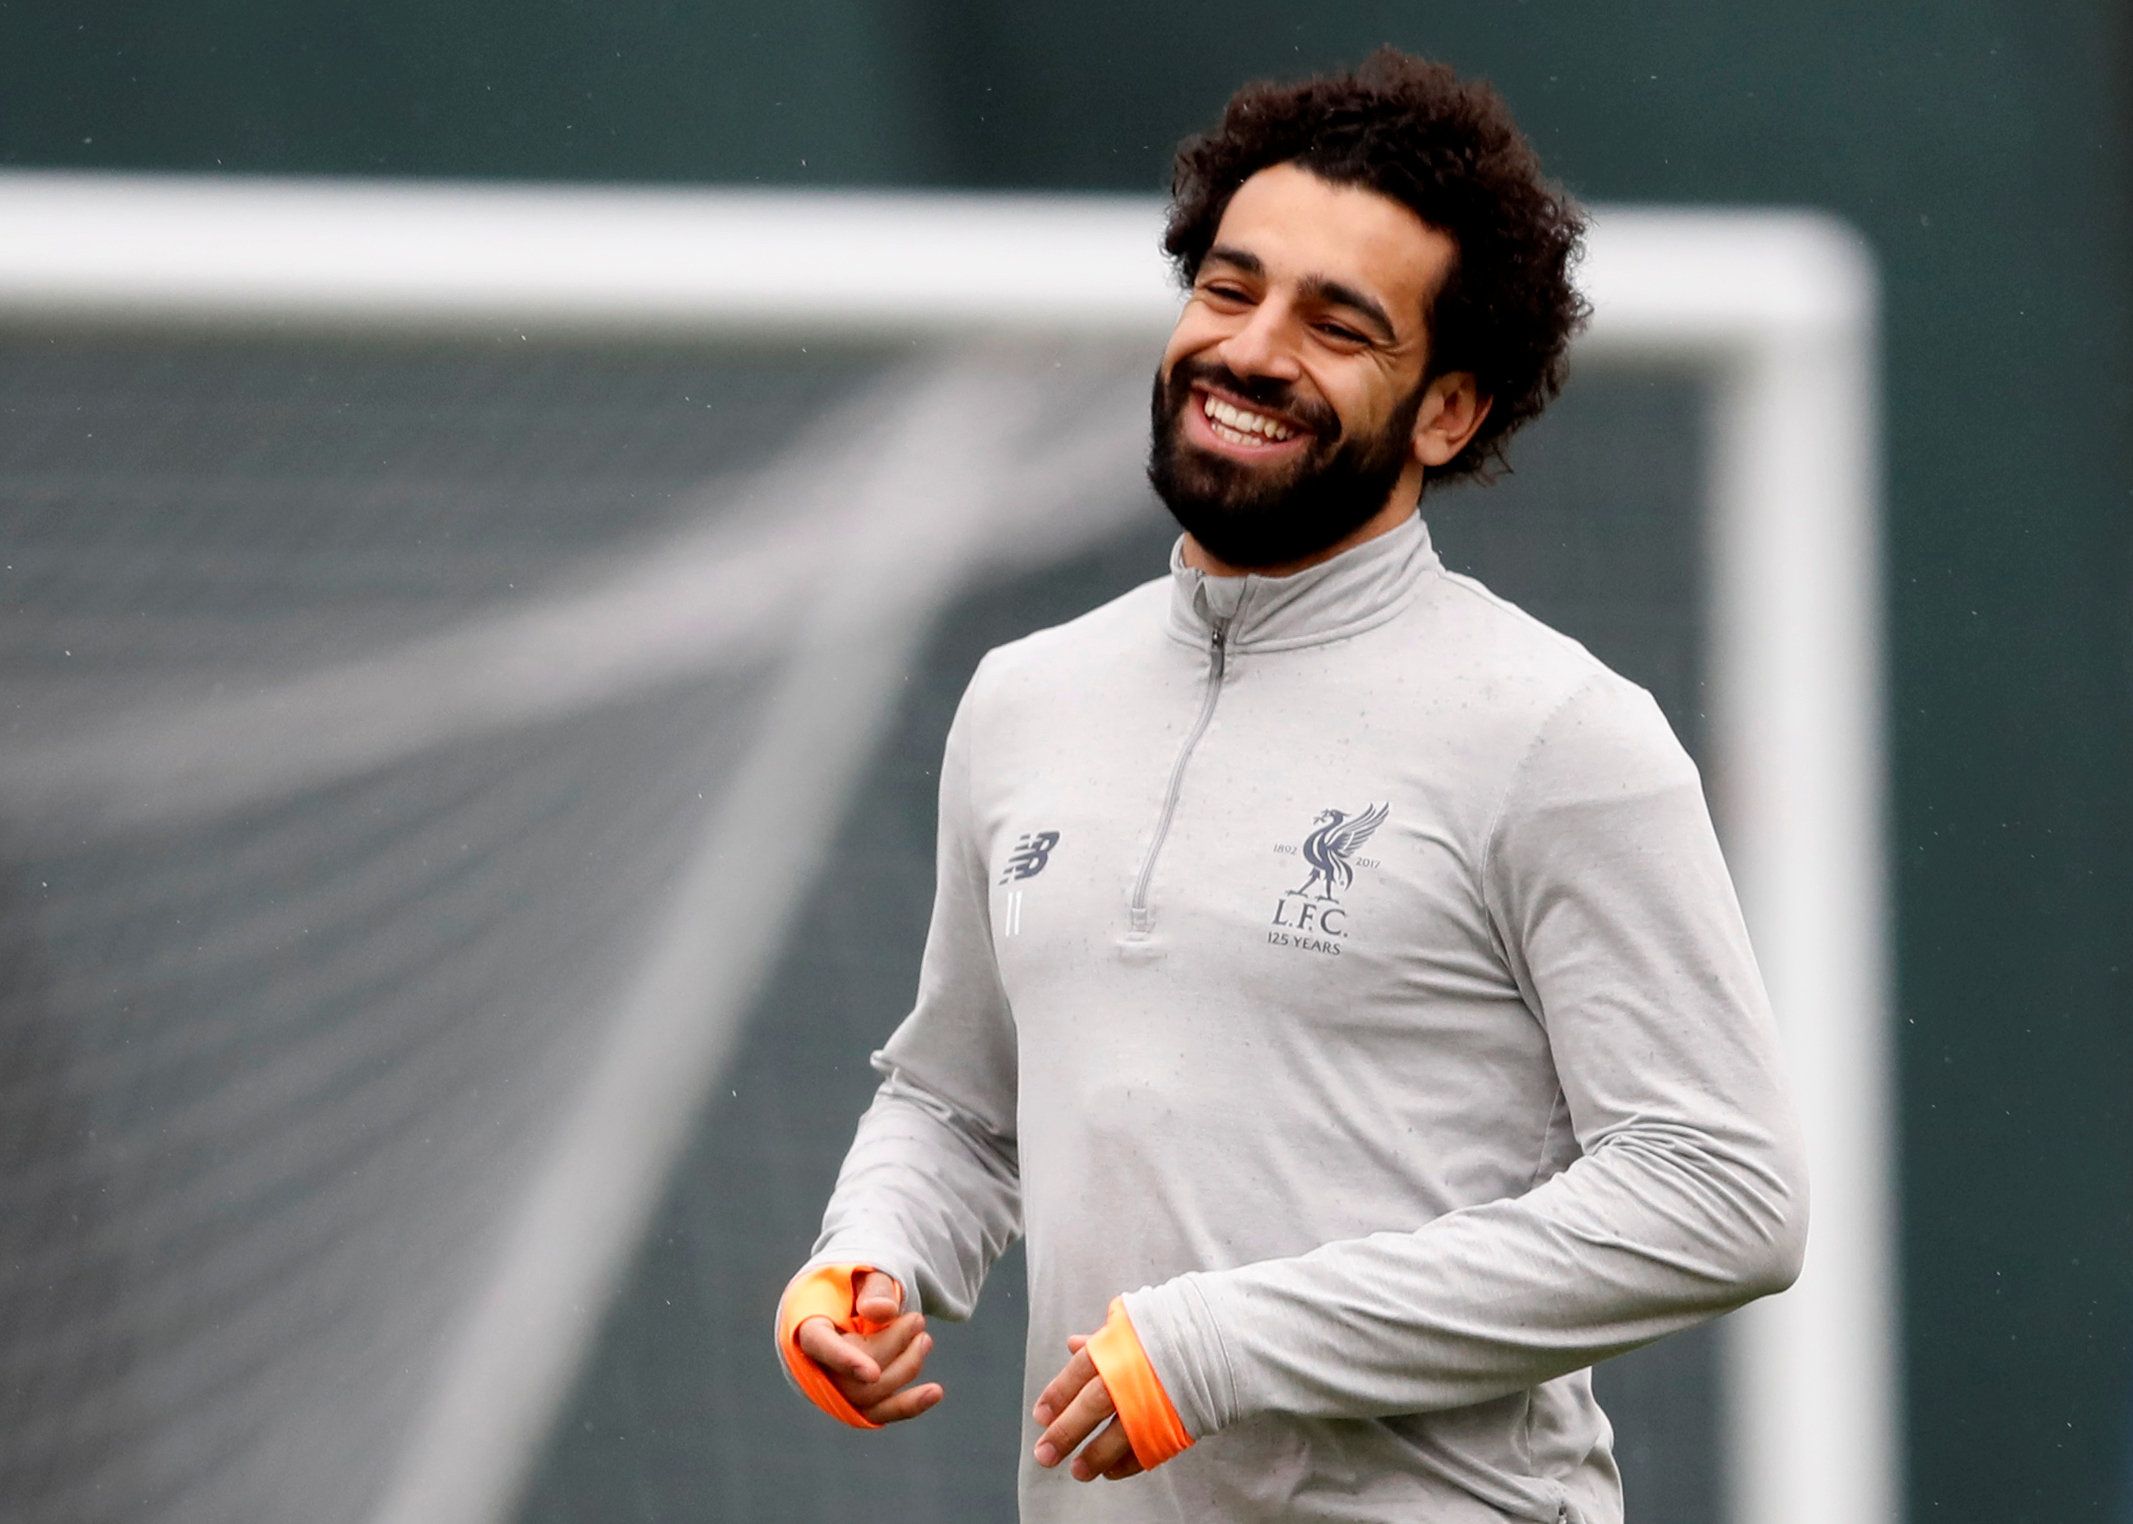 Soccer Football - Champions League - Liverpool Training - Melwood Training Ground, Liverpool, Britain - April 9, 2018   Liverpool's Mohamed Salah during training    Action Images via Reuters/Carl Recine